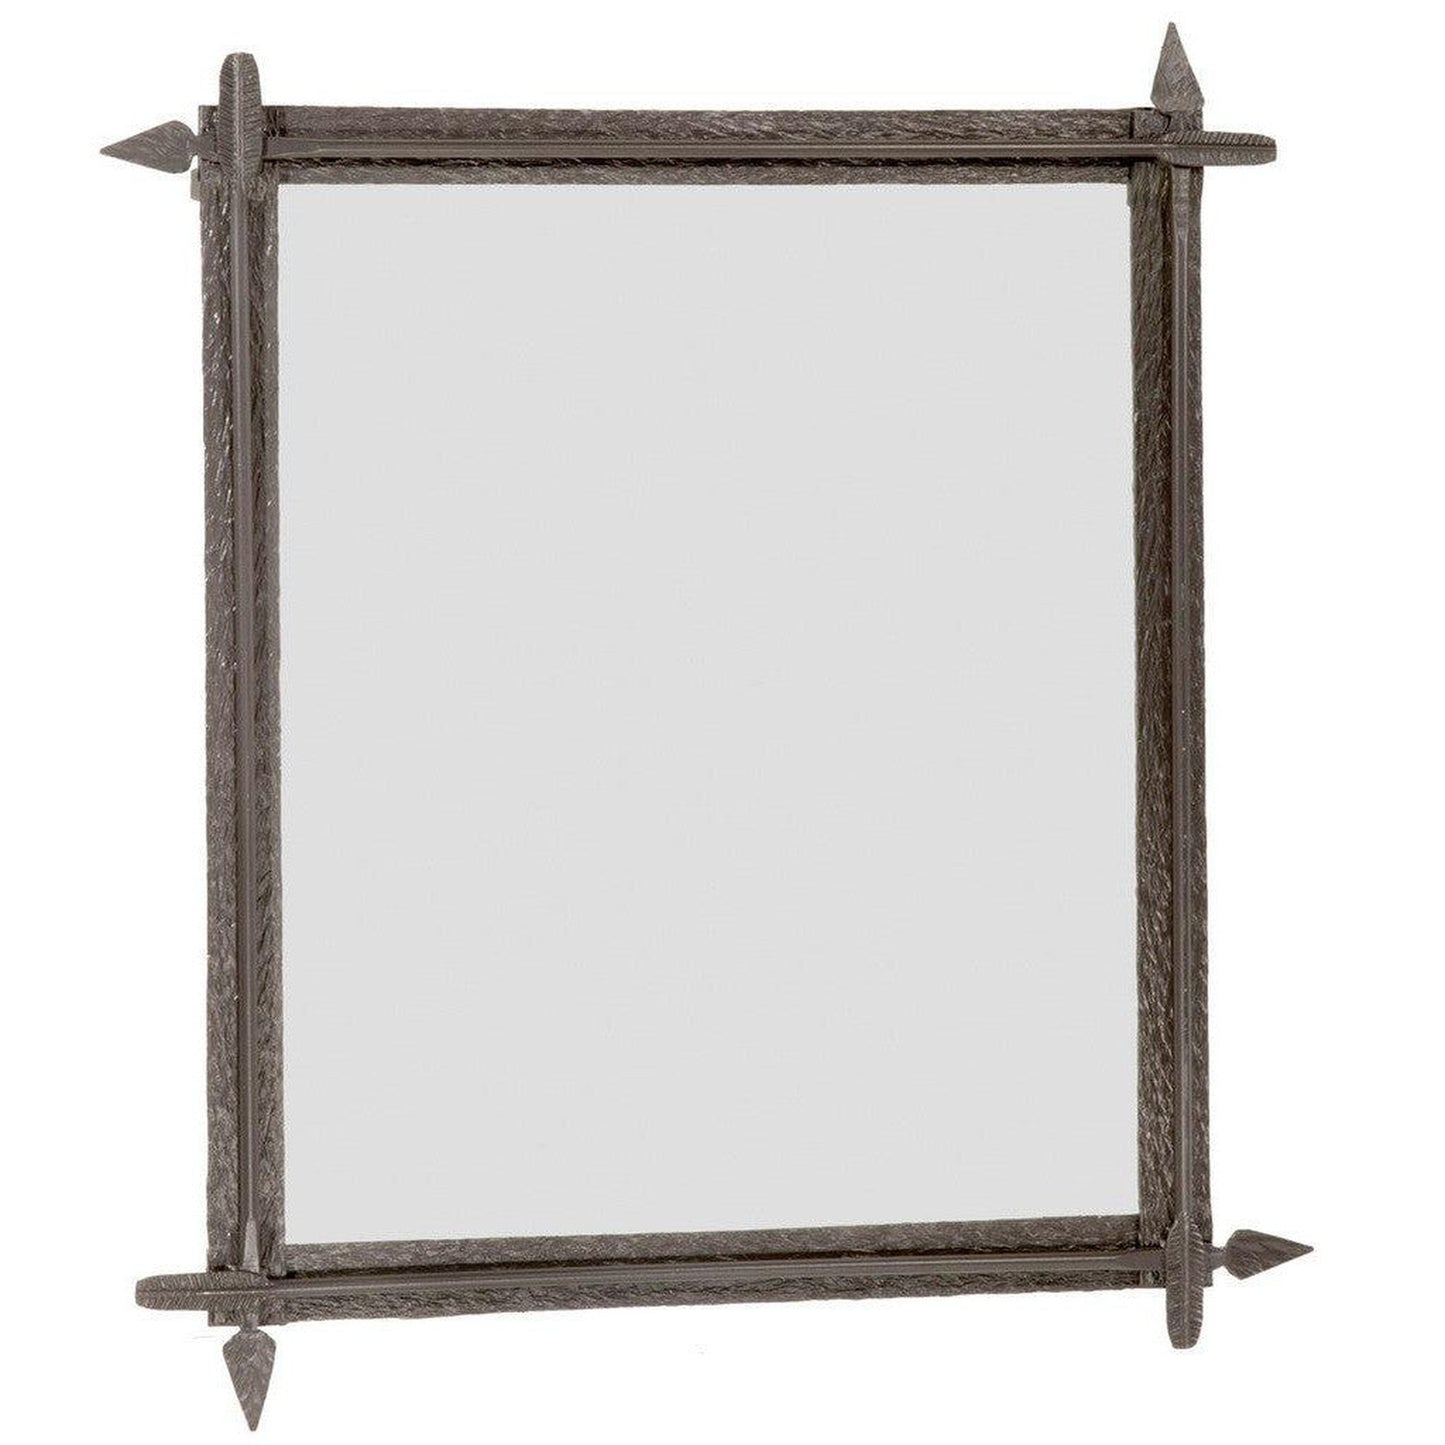 Stone County Ironworks Quapaw 28" x 32" Small Hand Rubbed Brass Iron Wall Mirror